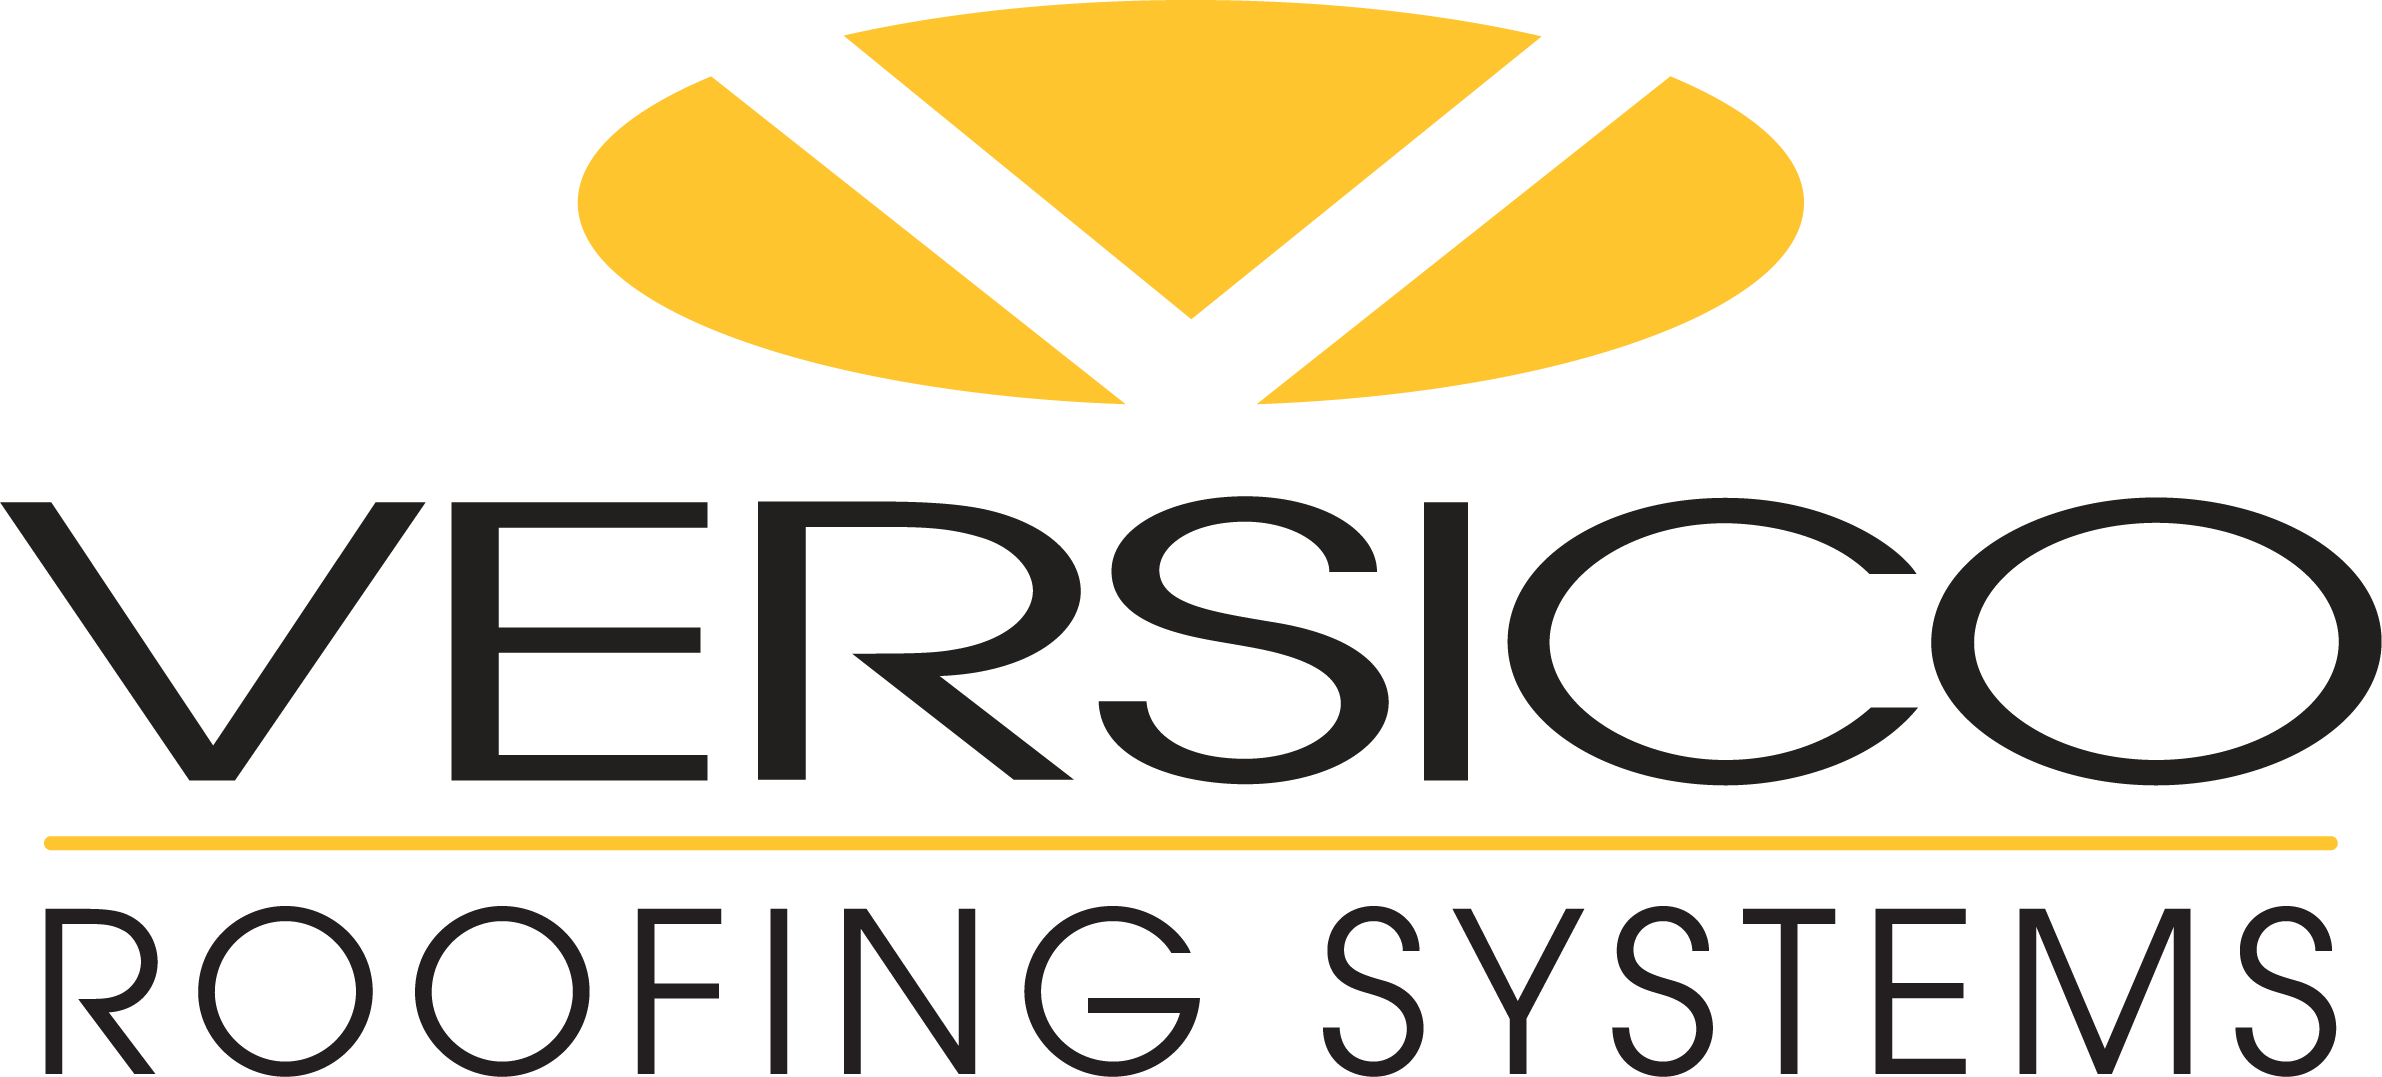 Versico Roofing Systems